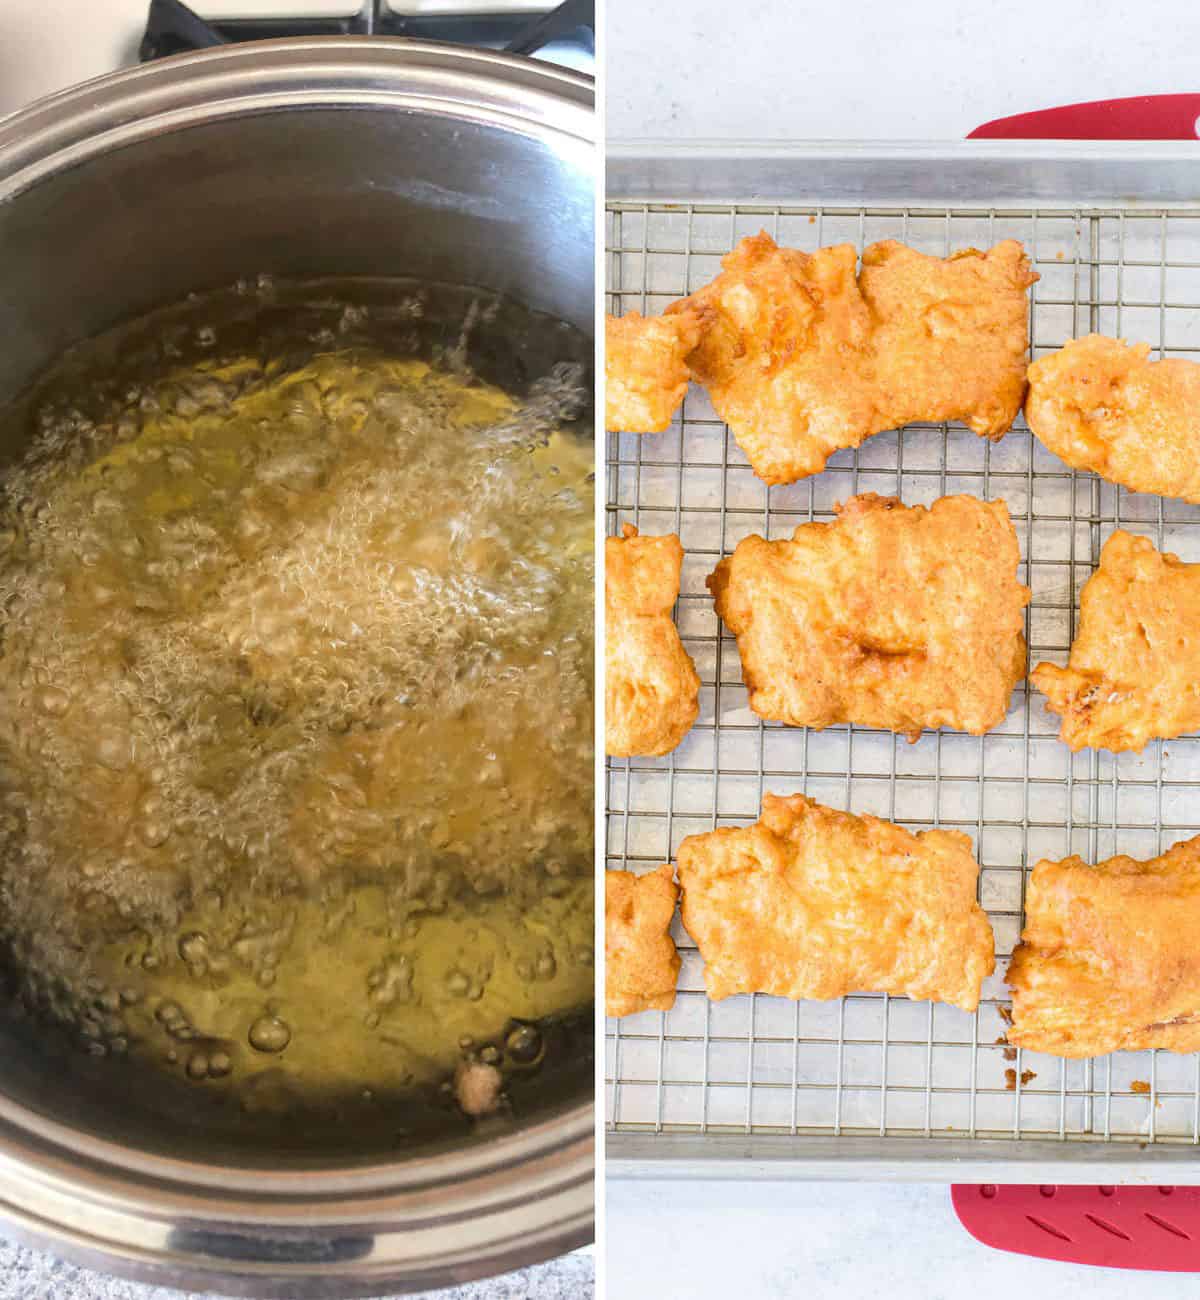 pot of fish frying in oil, deep fried cod on cooling rack